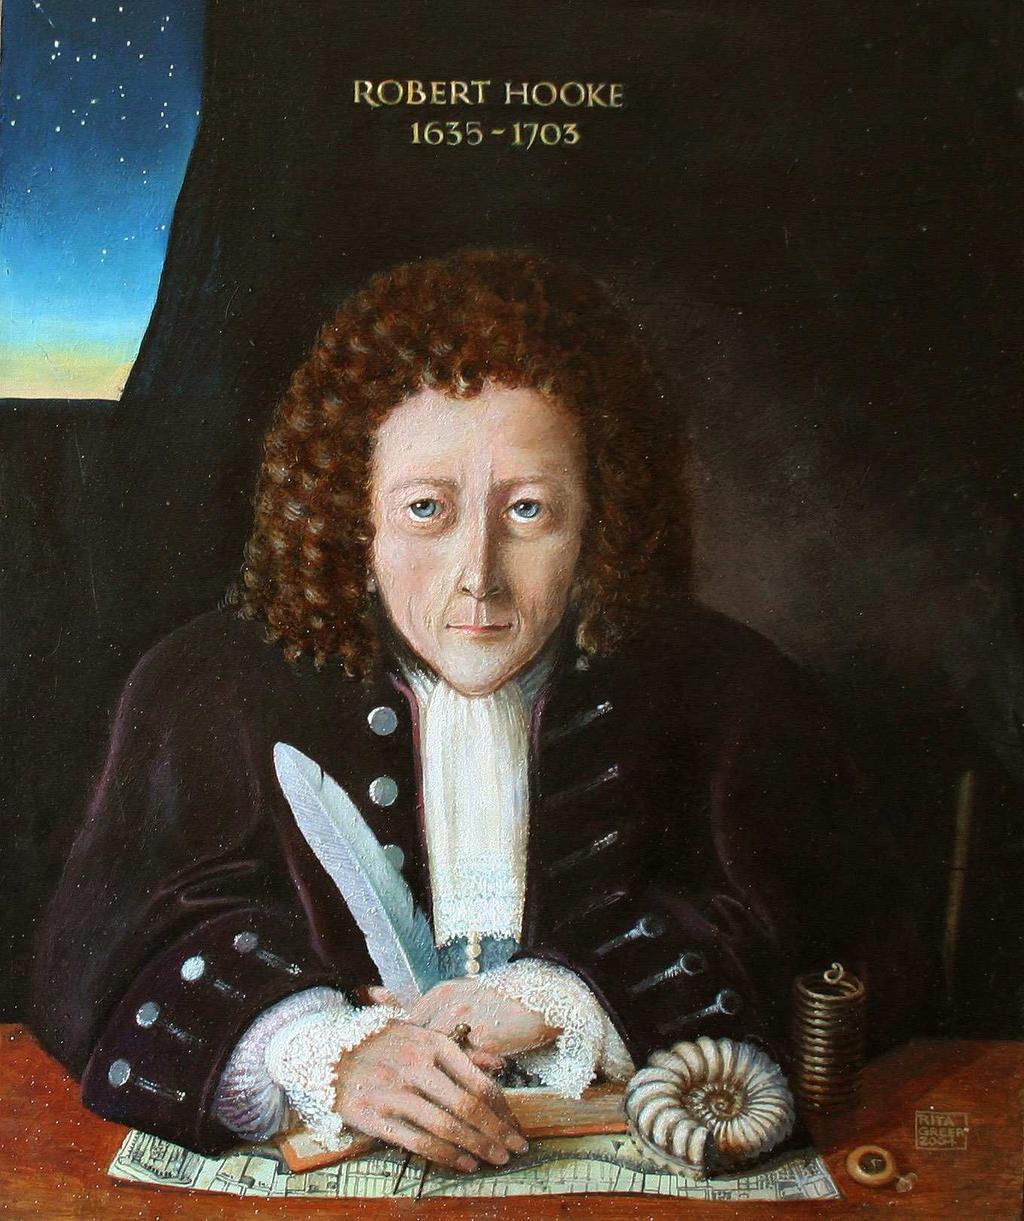 Hooke and Newton: Discussing gravity 1679-1680: Robert Hooke and Isaac Newton exchange a few letters discussing physics and philoshophy, in which Newton suggests Hooke to find an experimental proof